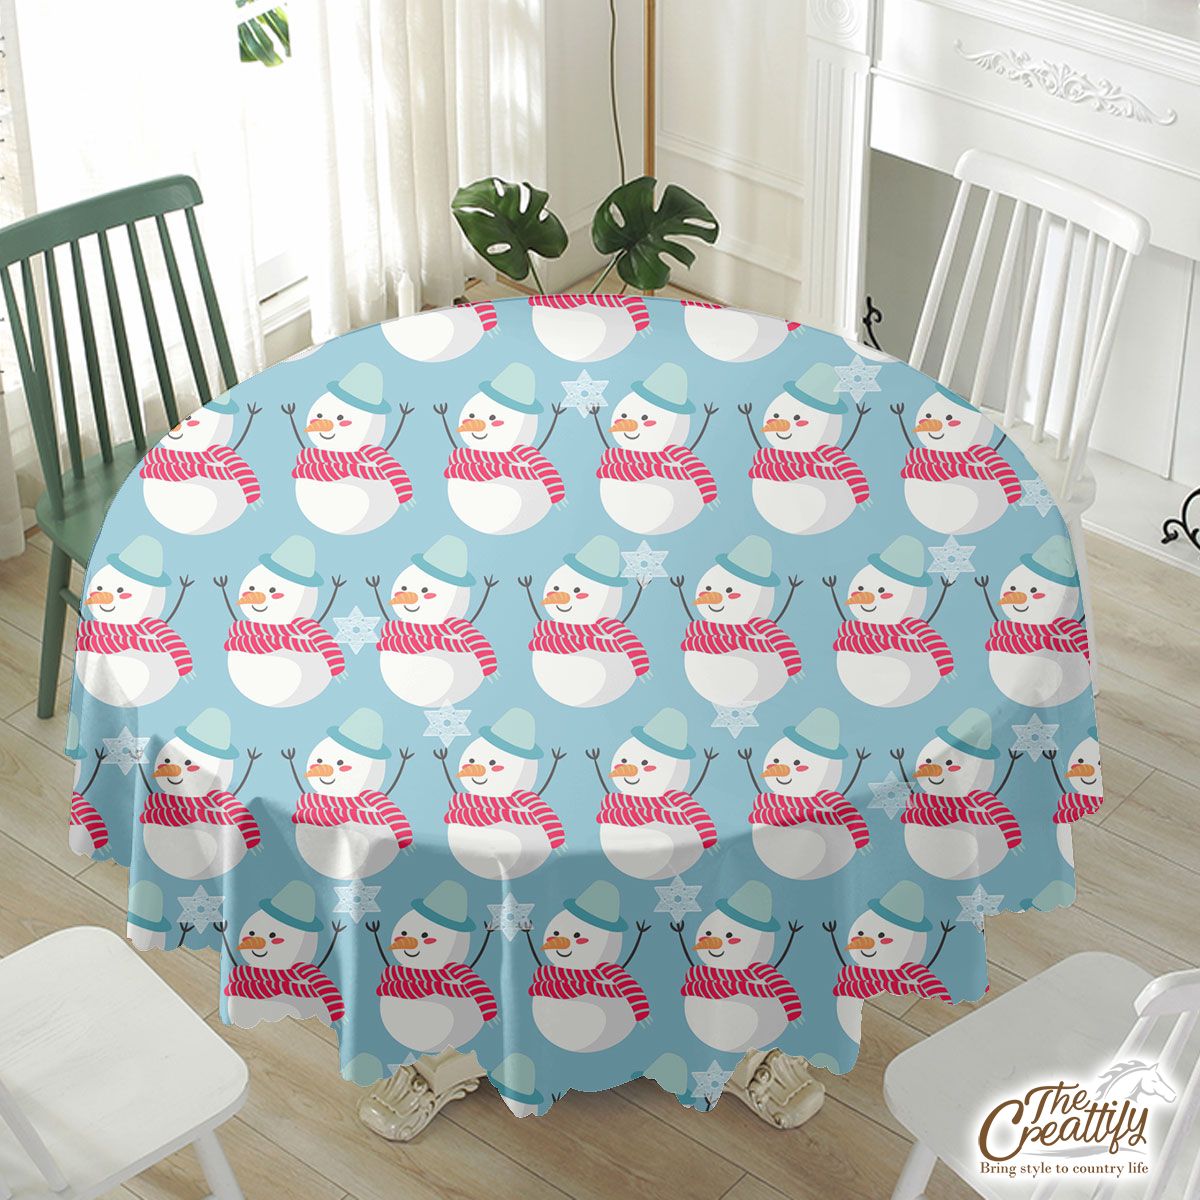 Snowman, Christmas Snowman And Blue Snowflake Waterproof Tablecloth